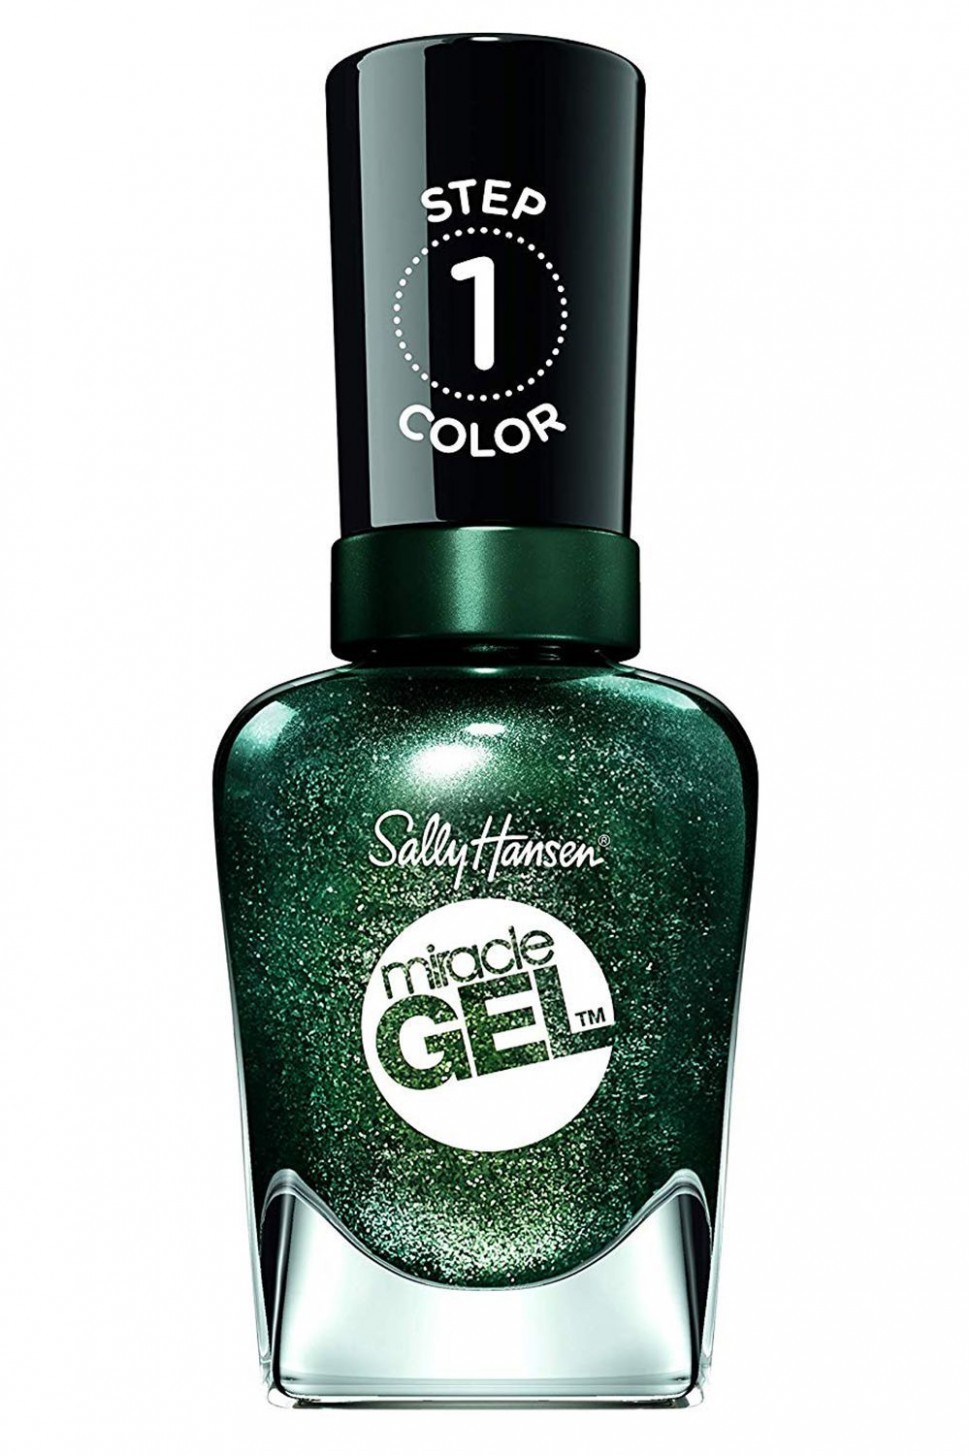 Sally Hansen Miracle Gel In Neblue La Painting Air Dry Clay With Nail Polish